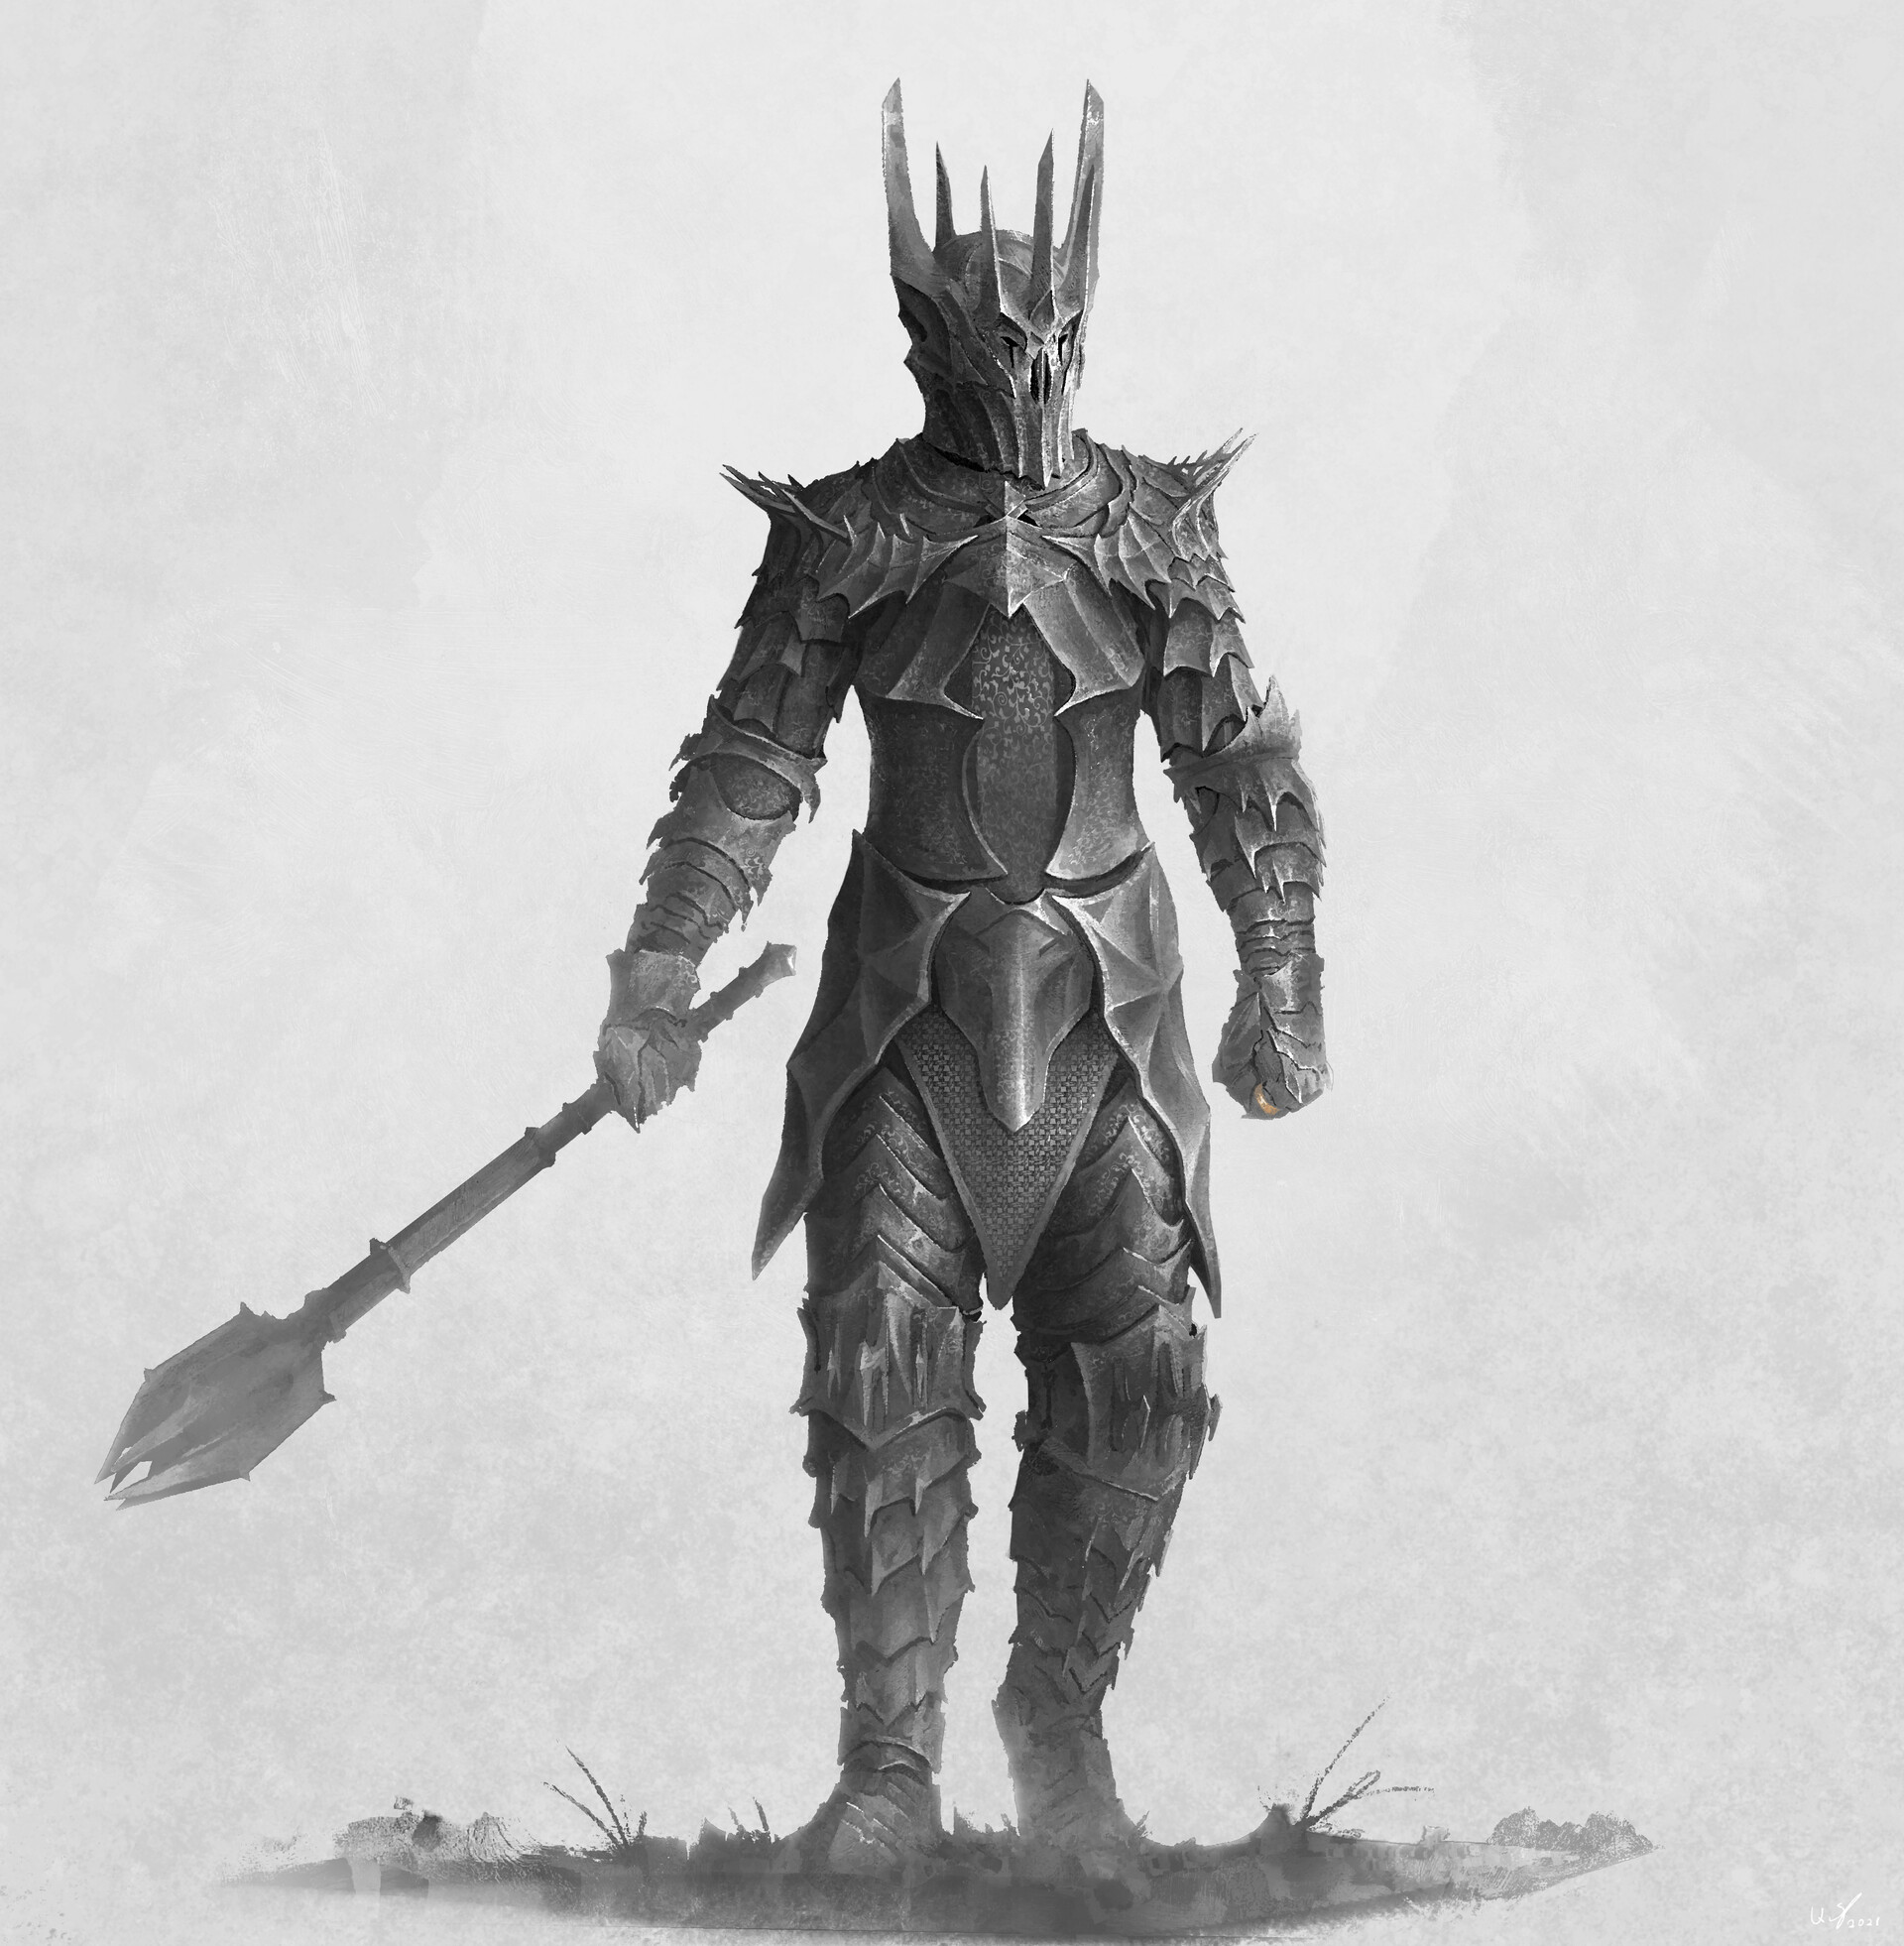 General 1920x1962 Sauron The Lord of the Rings fantasy art armor